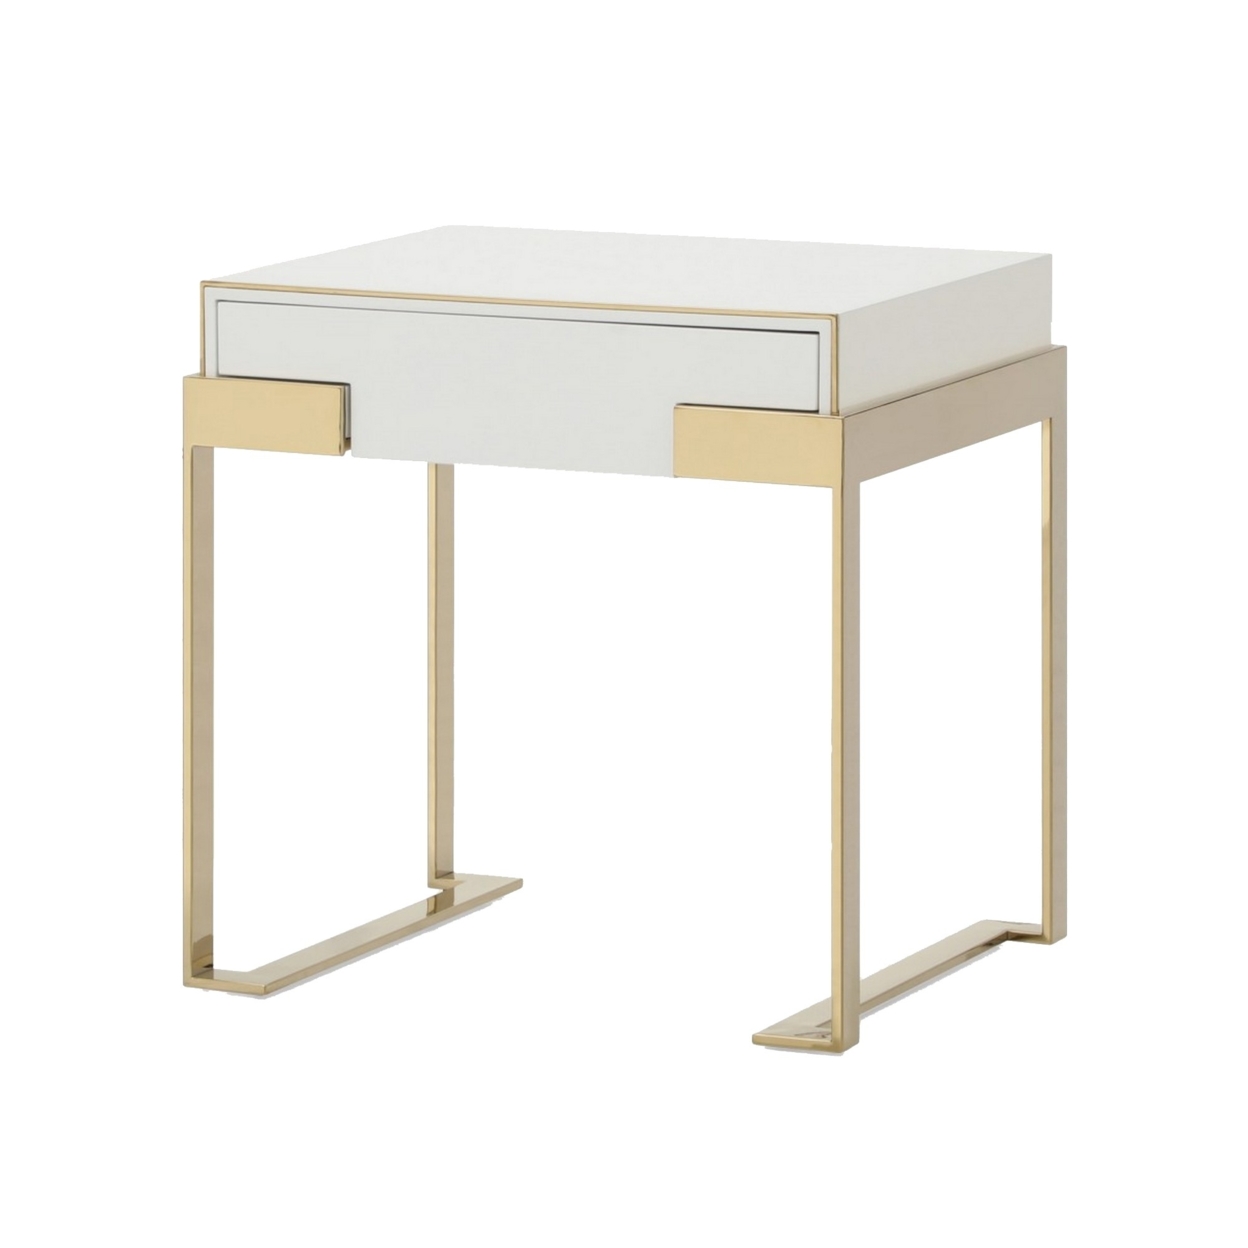 1 Drawer Nightstand With Metal Frame Support, Gold And White- Saltoro Sherpi